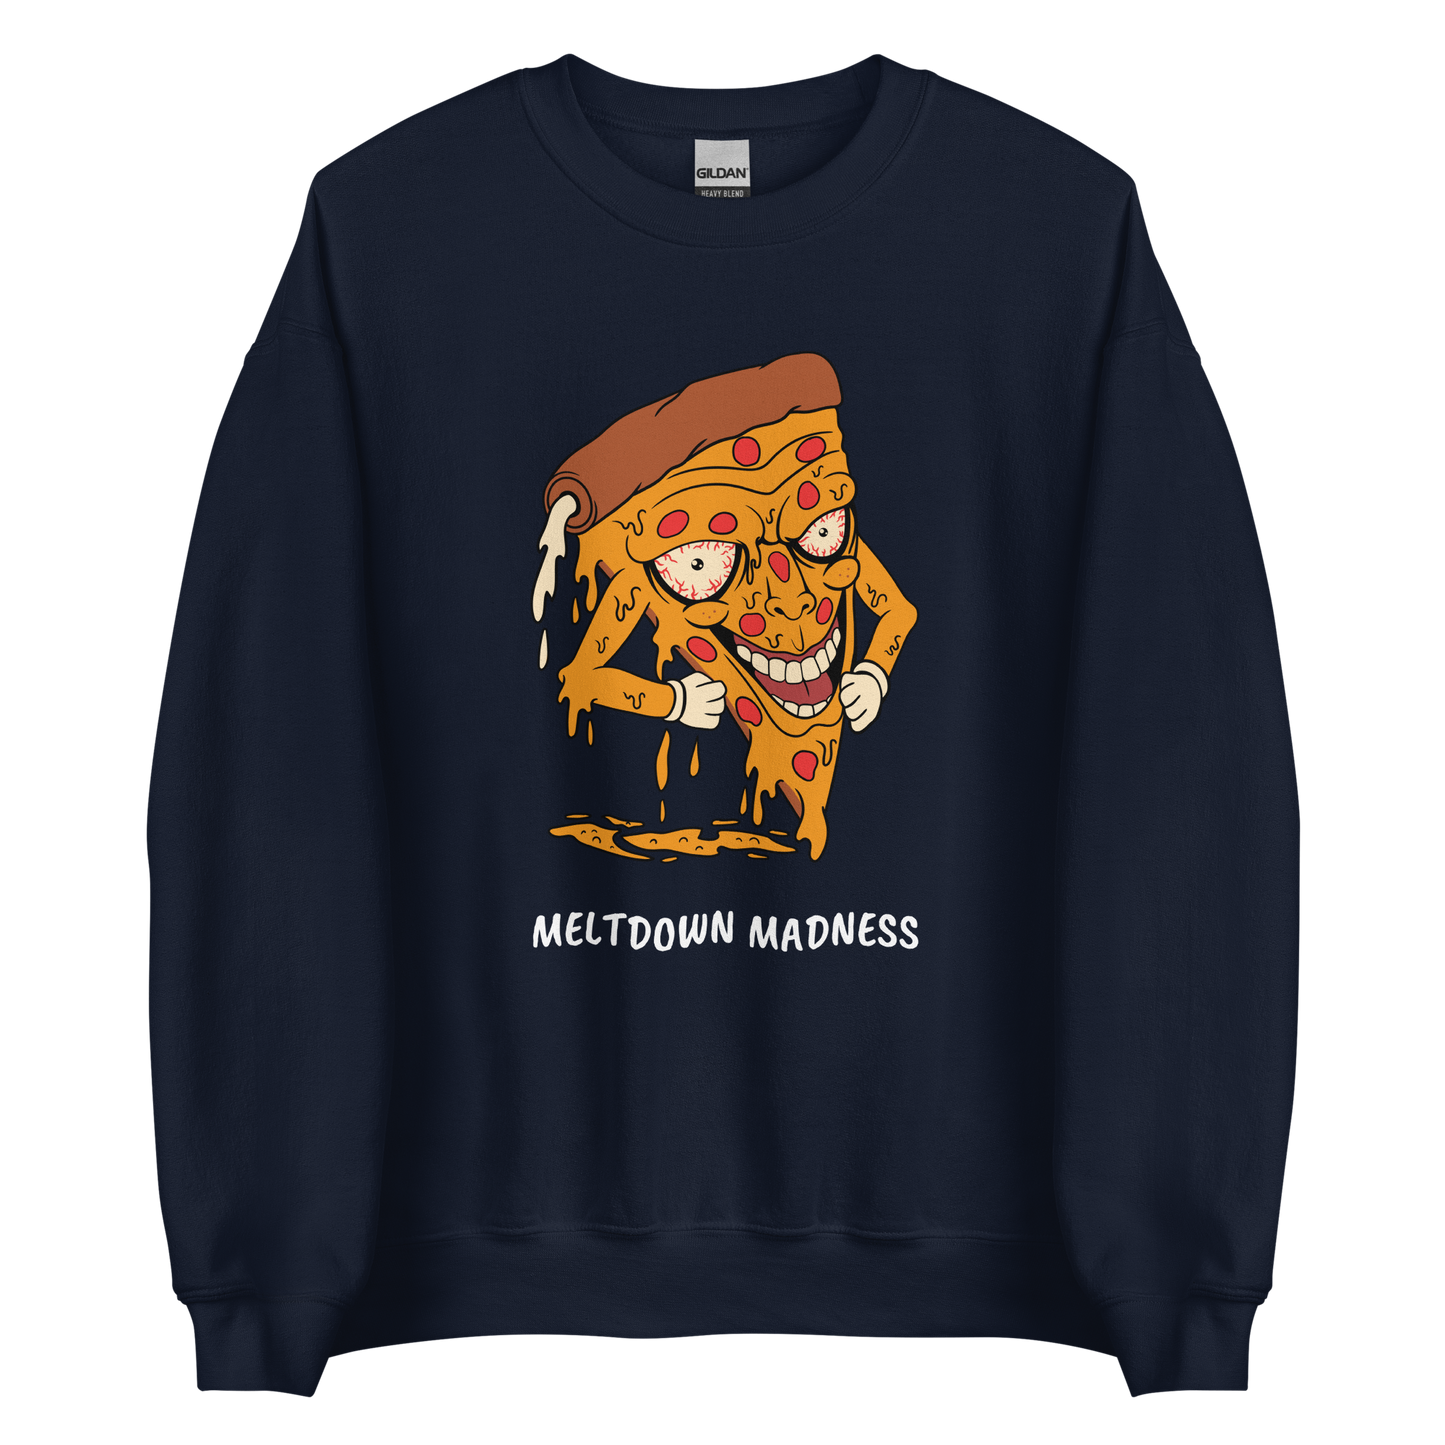 Navy Melting Pizza Sweatshirt featuring a Meltdown Madness graphic on the chest - Funny Graphic Pizza Sweatshirts - Boozy Fox